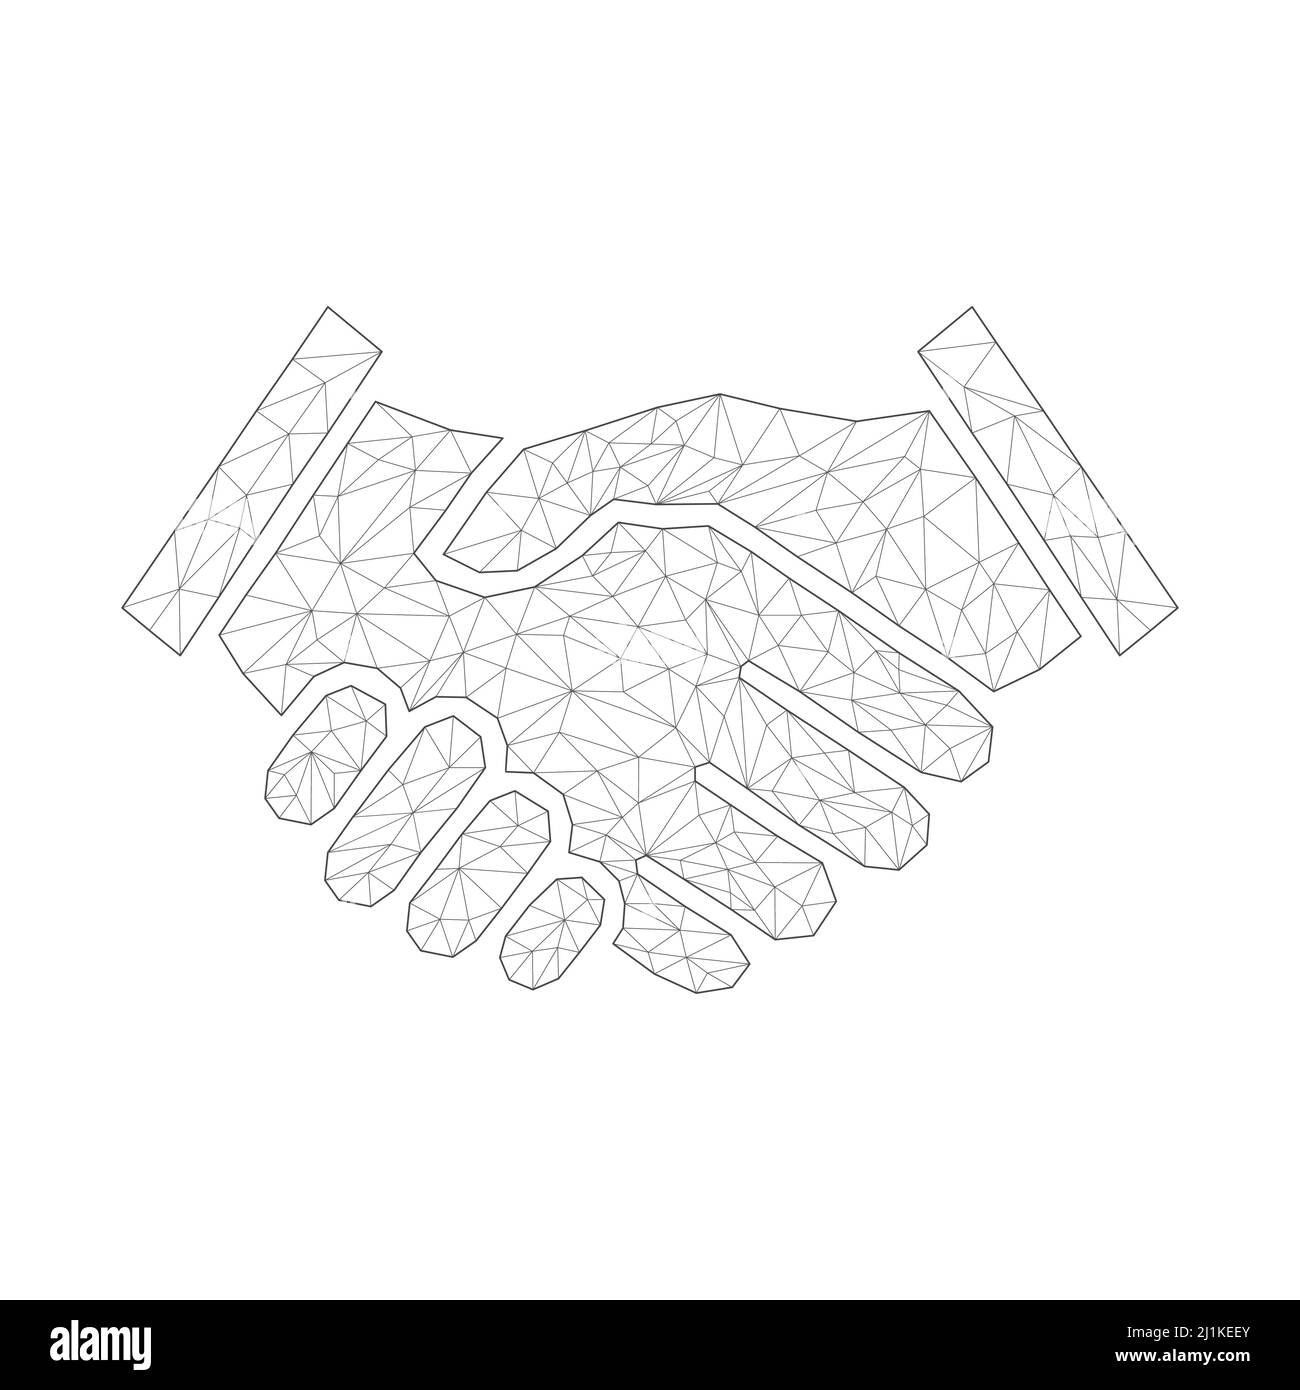 Handshake with polygonal shapes. Business agreement concept. Contract symbol with triangular elements. Stock Vector